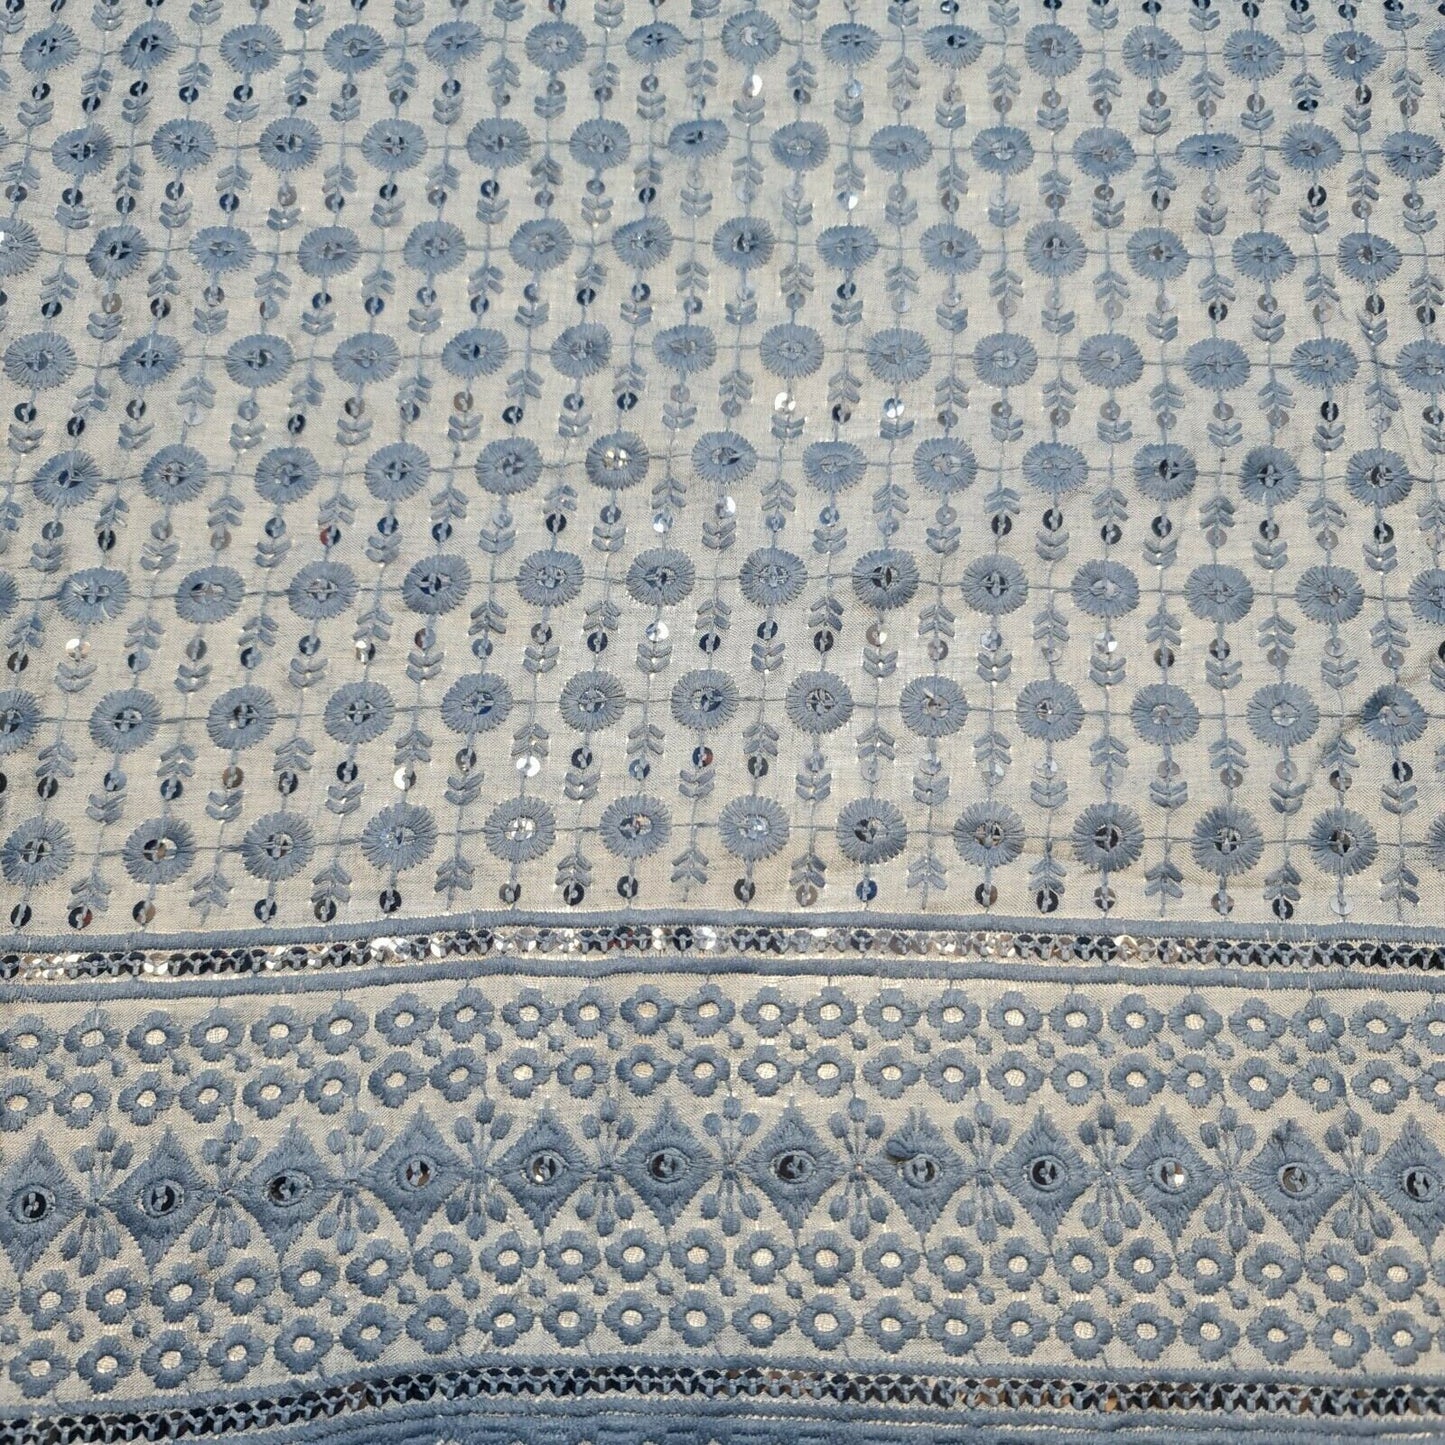 New Cotton Lawn Soft Broderie Anglaise Embroidery Border Dress Craft Fabric 50"J (Grey)